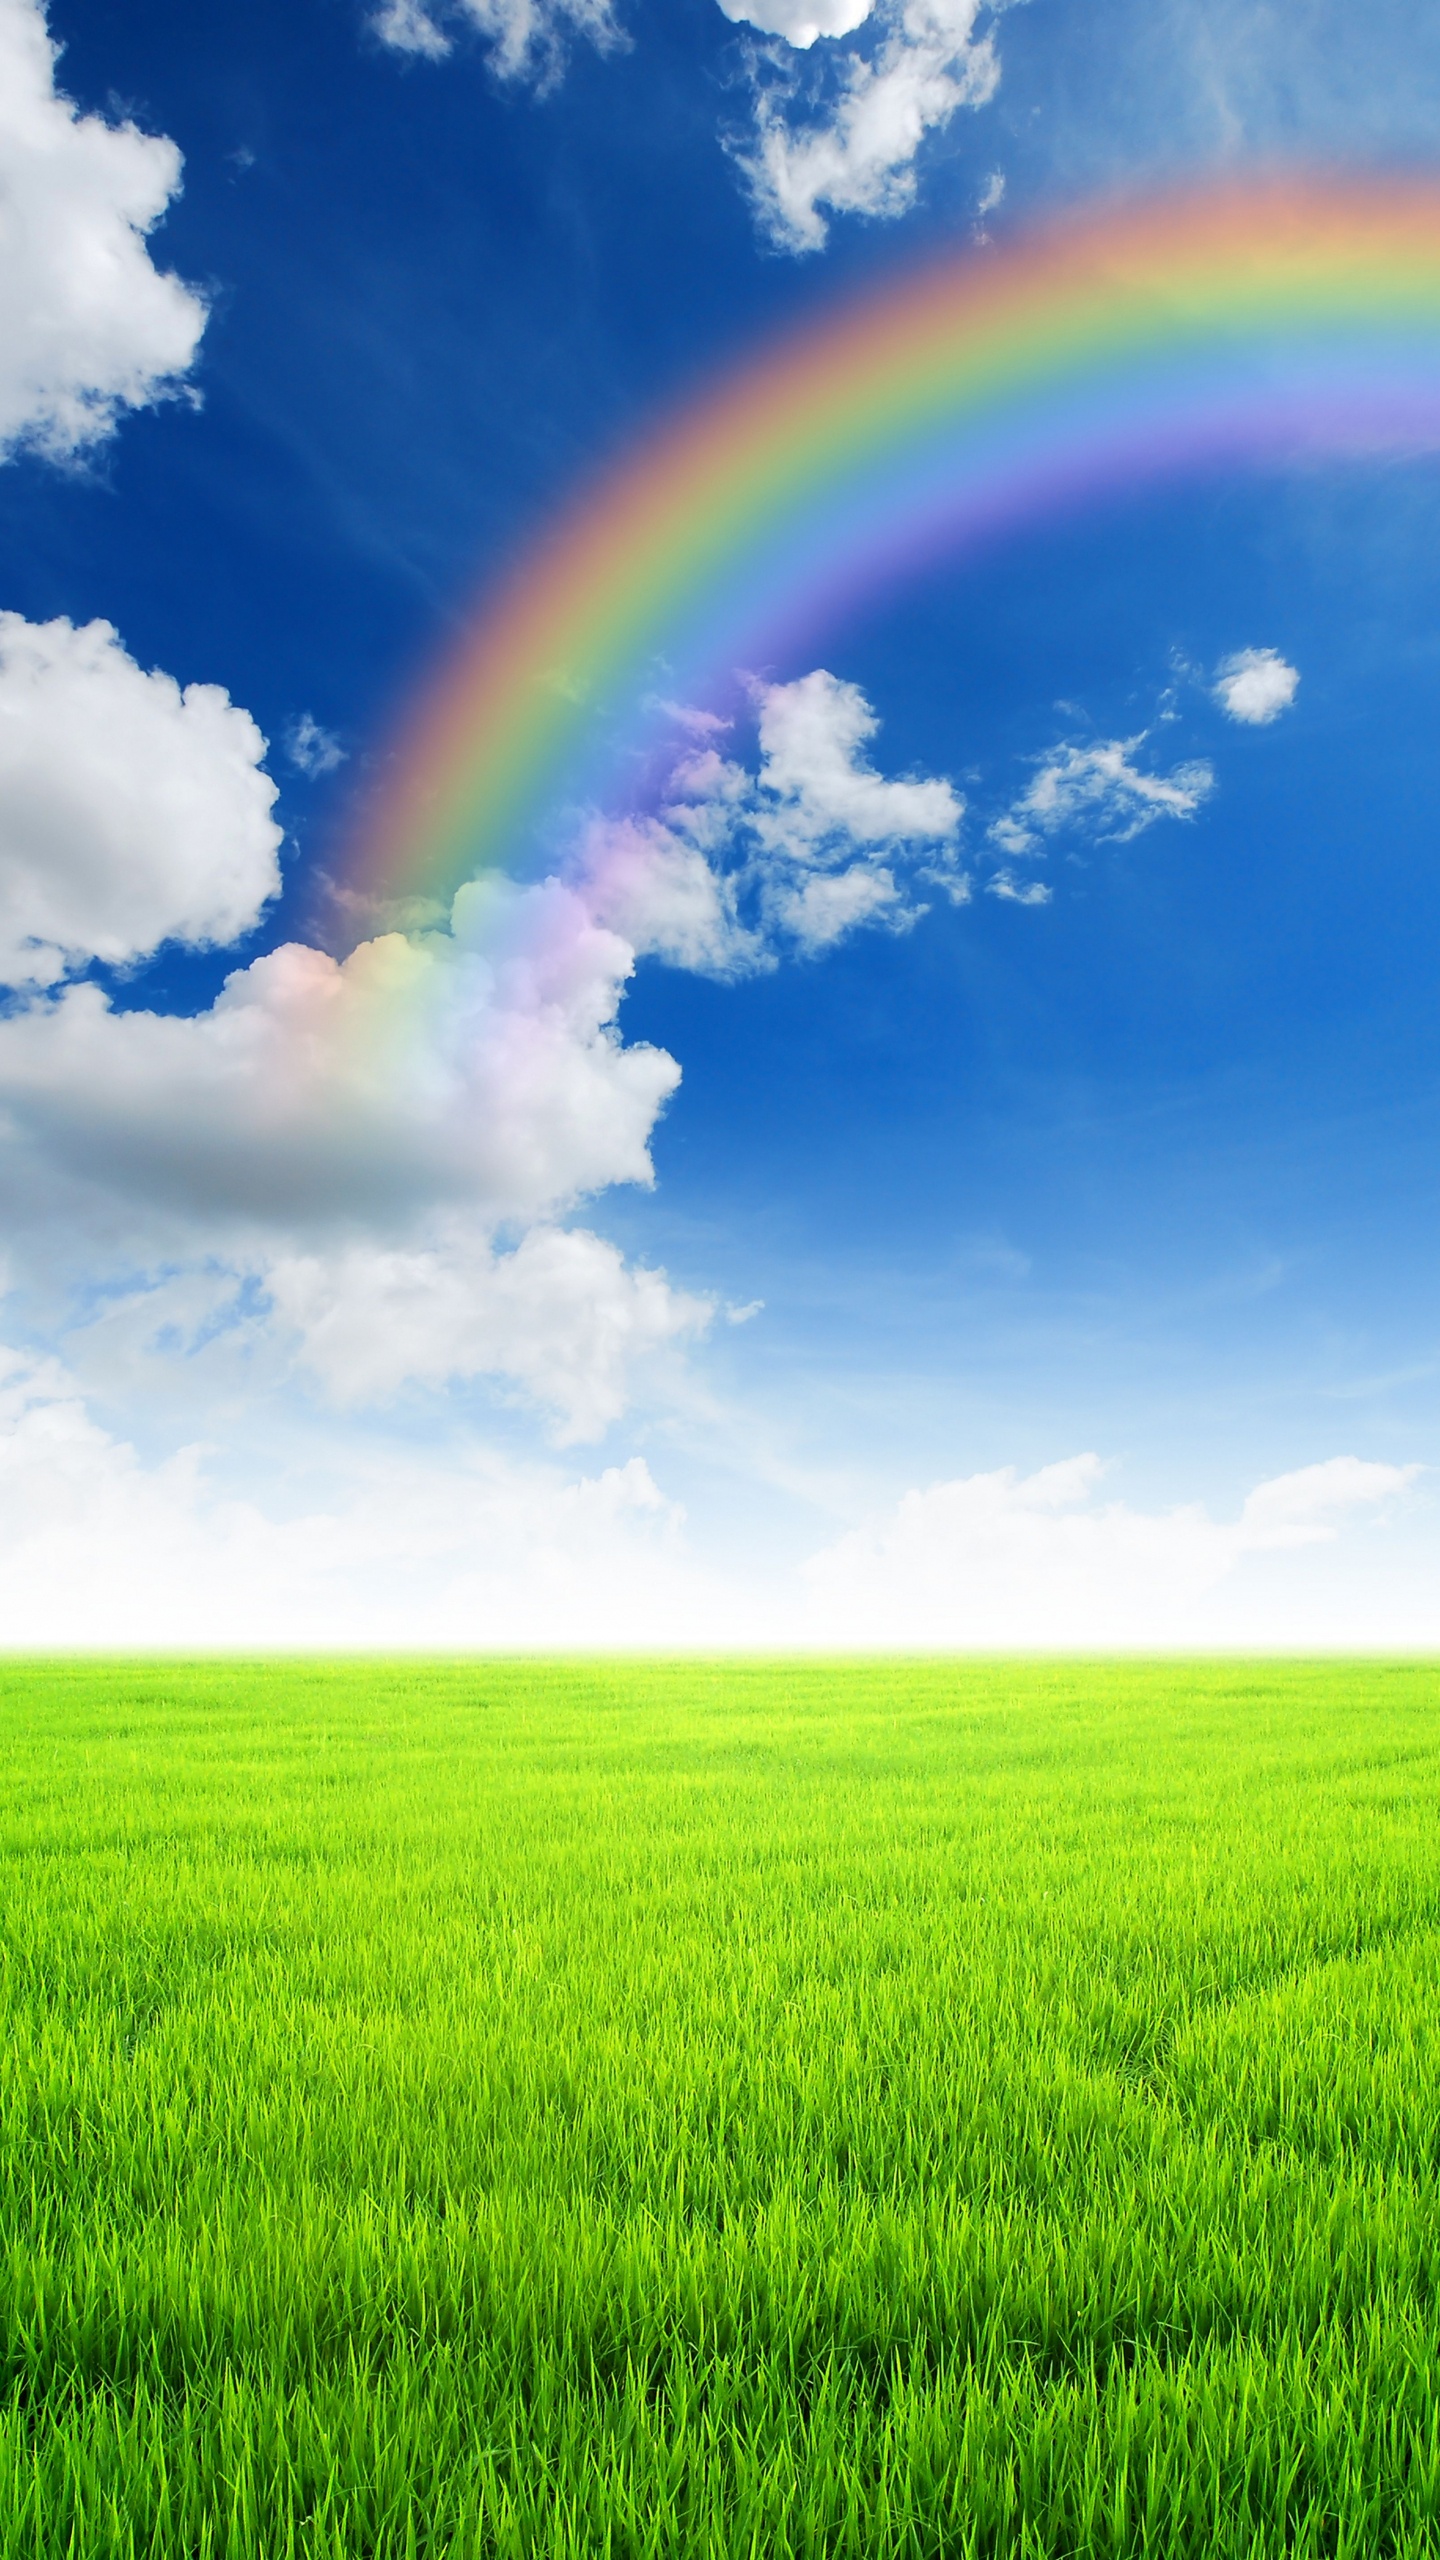 Green Grass Field Under Blue Sky and White Clouds During Daytime. Wallpaper in 1440x2560 Resolution